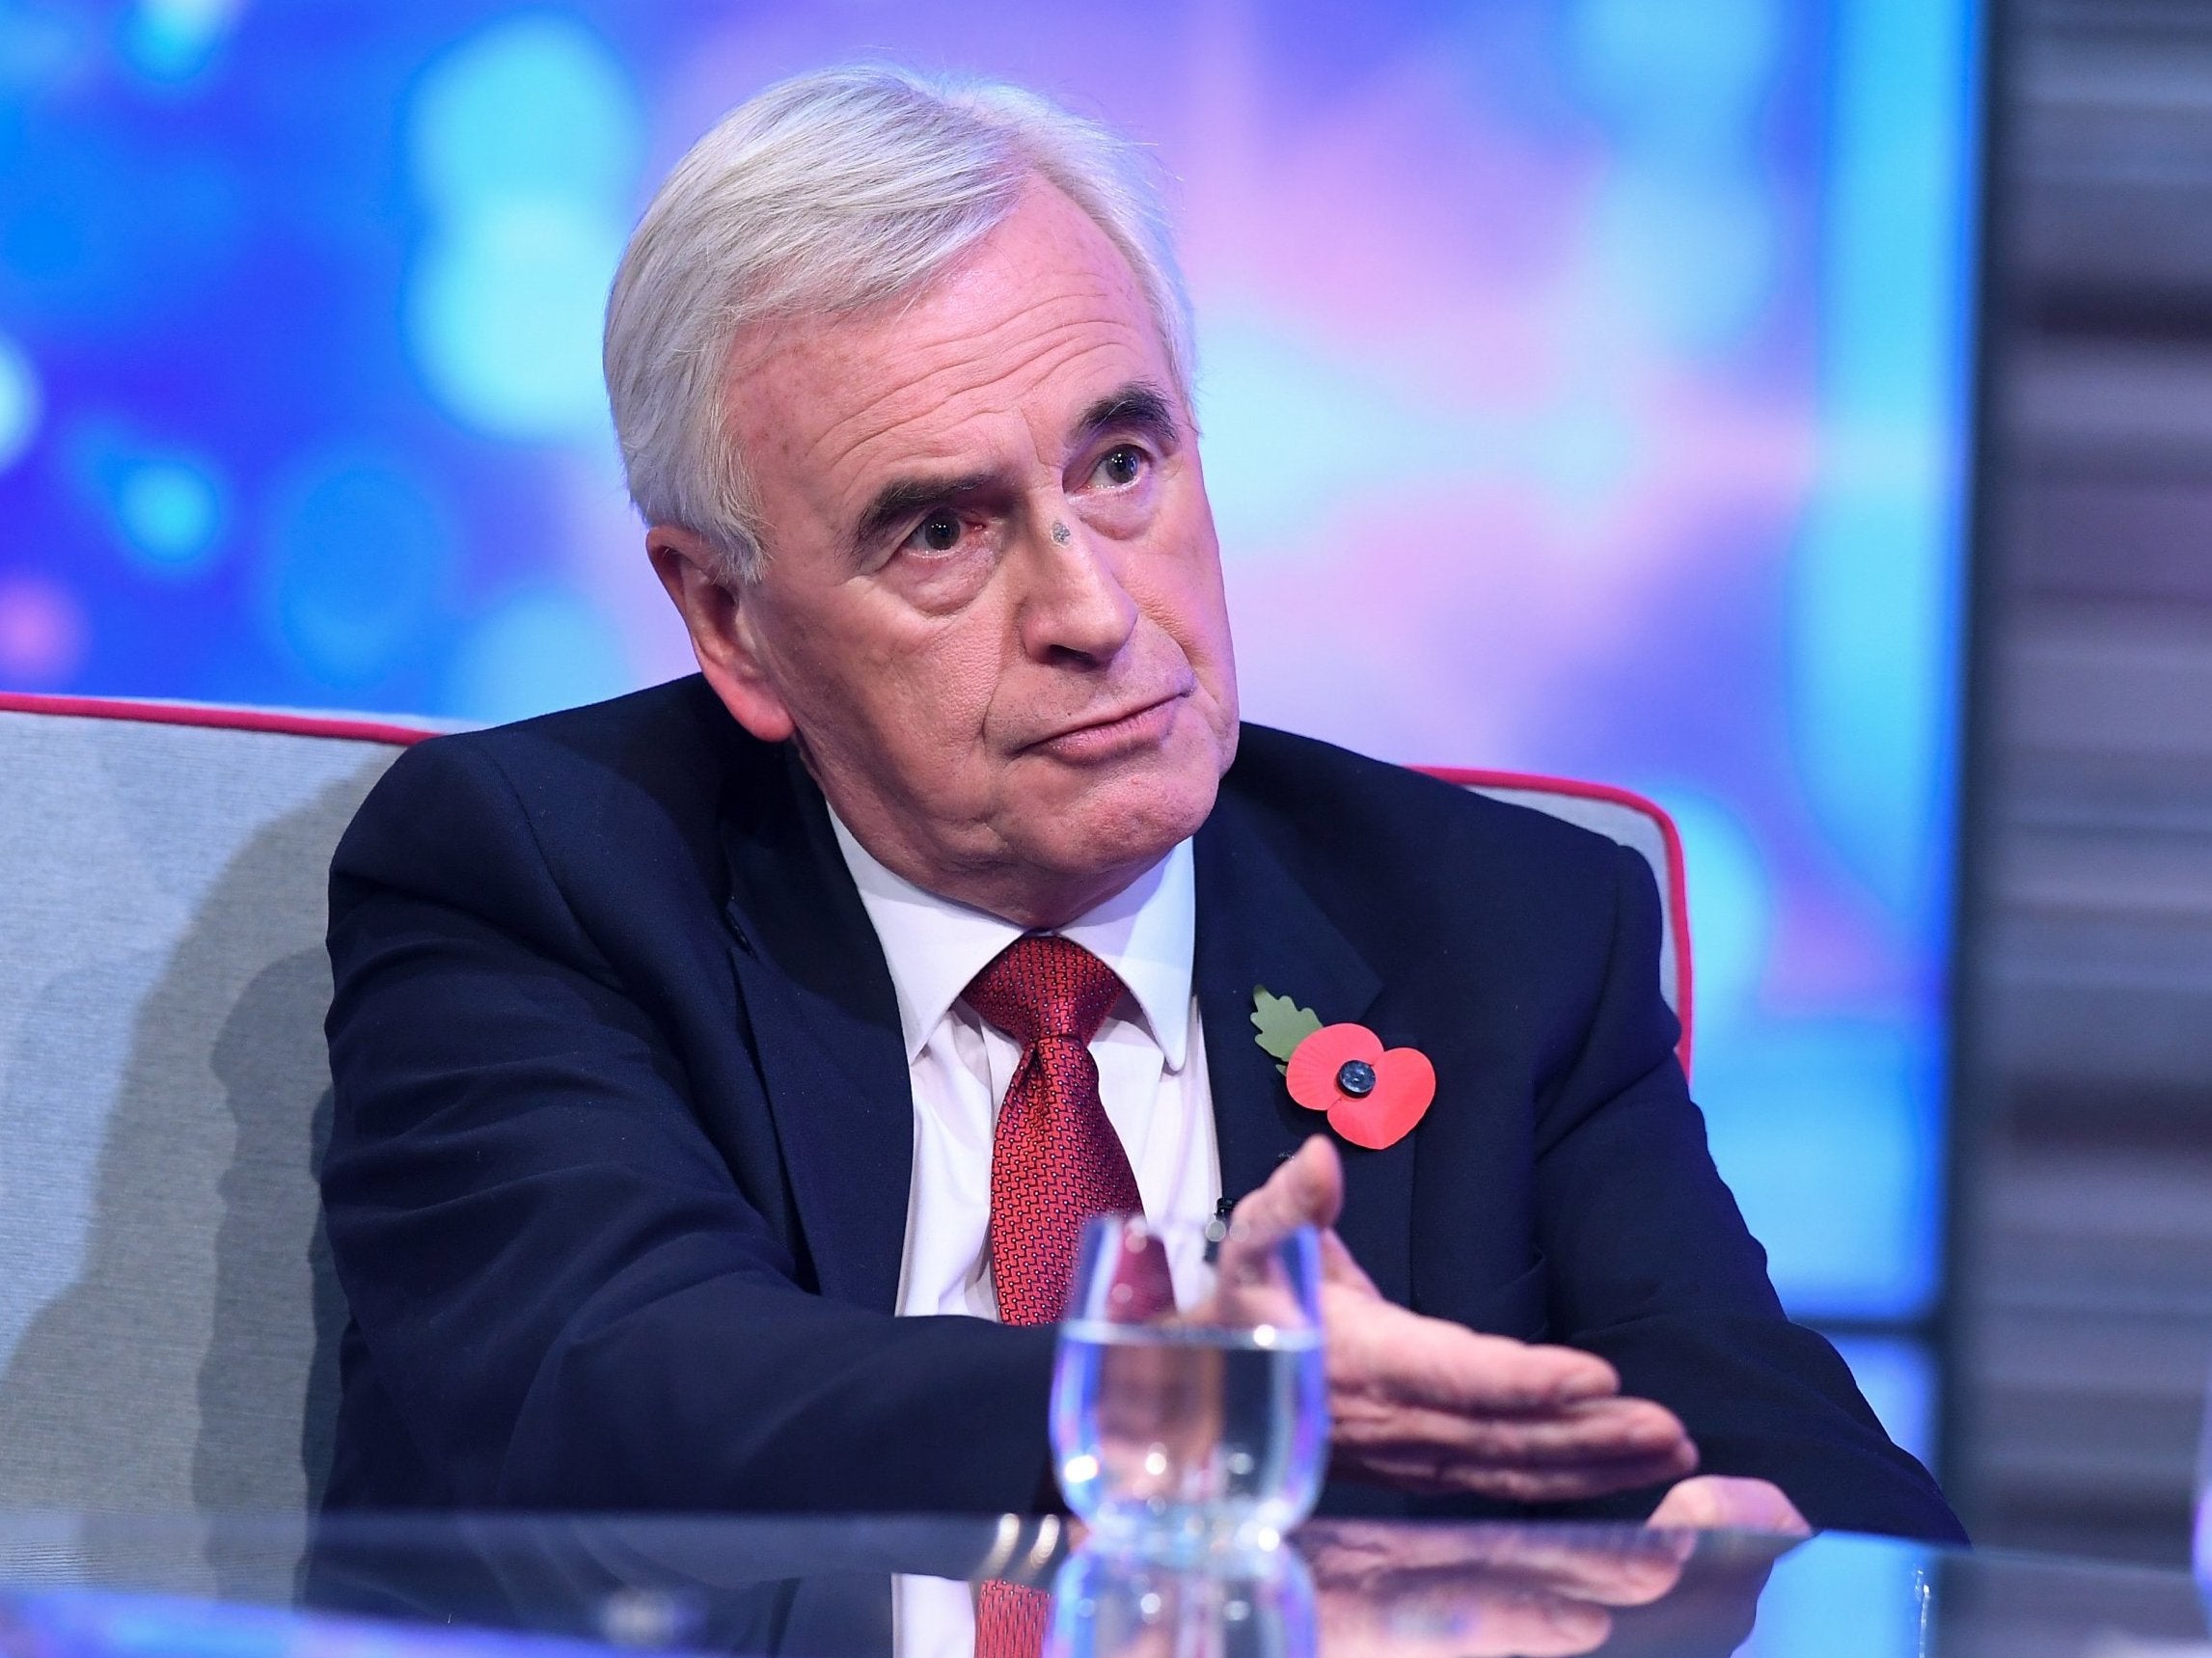 McDonnell previously said the radical idea was 'really interesting'